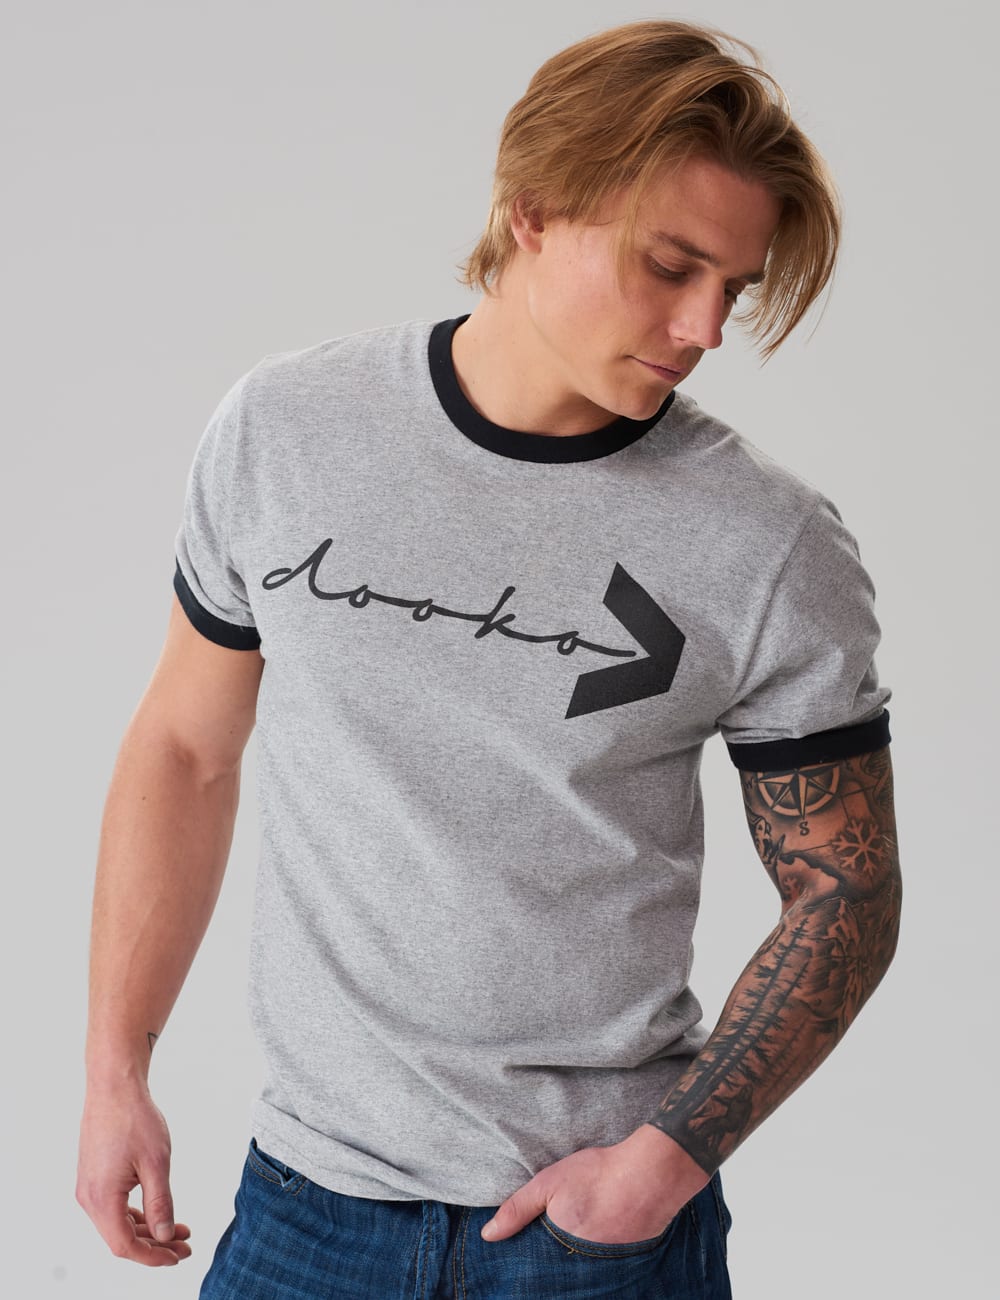 model wearing the gray ringer t-shirt by dooko